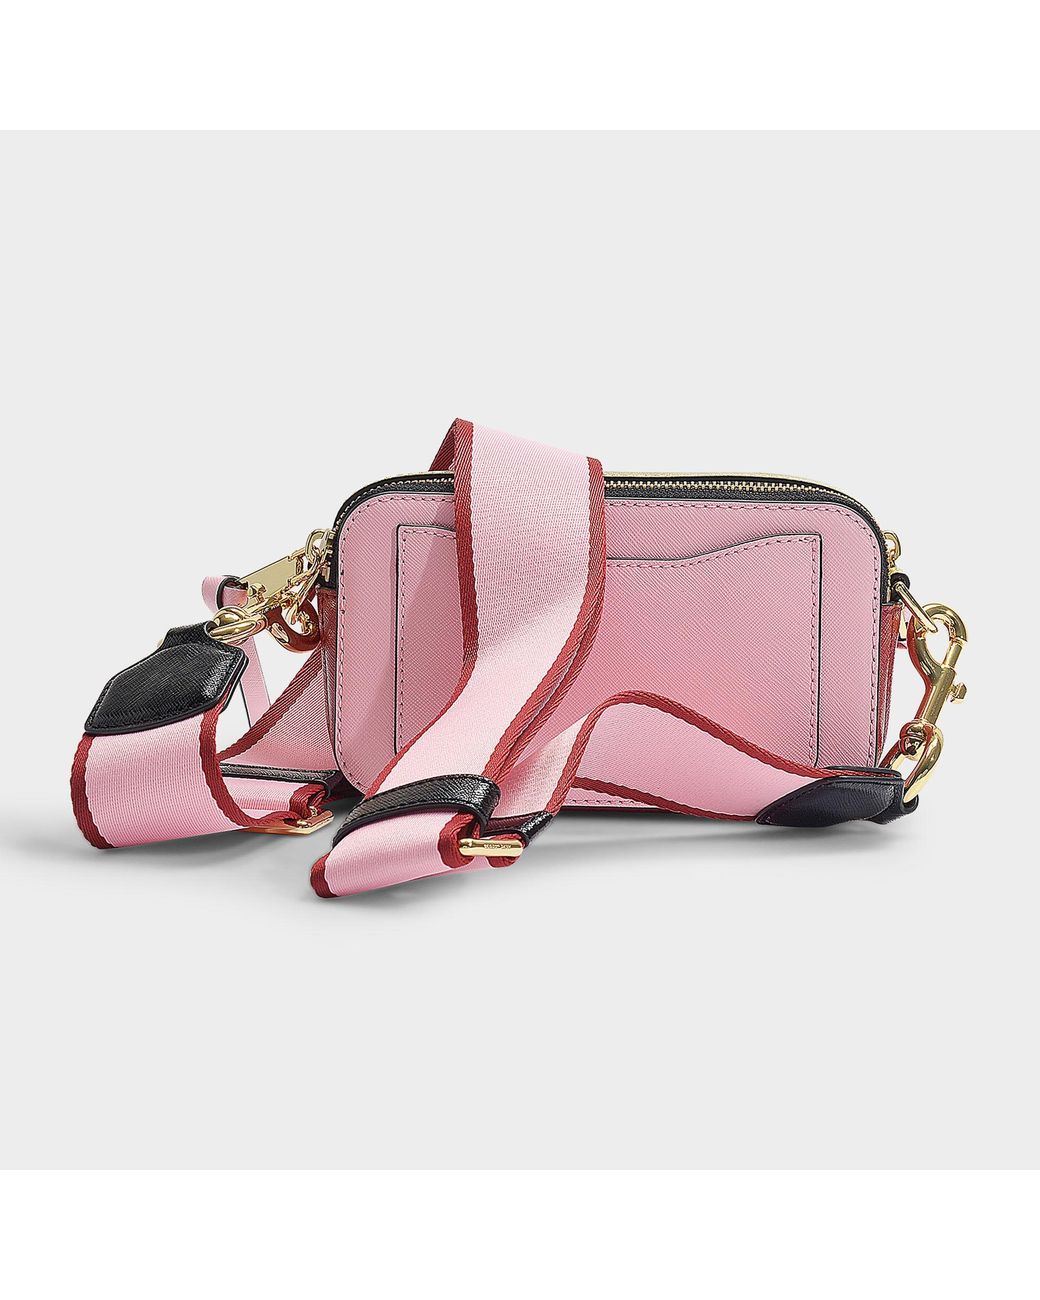 3D model Marc Jacobs Snapshot Bag Leather Pink VR / AR / low-poly